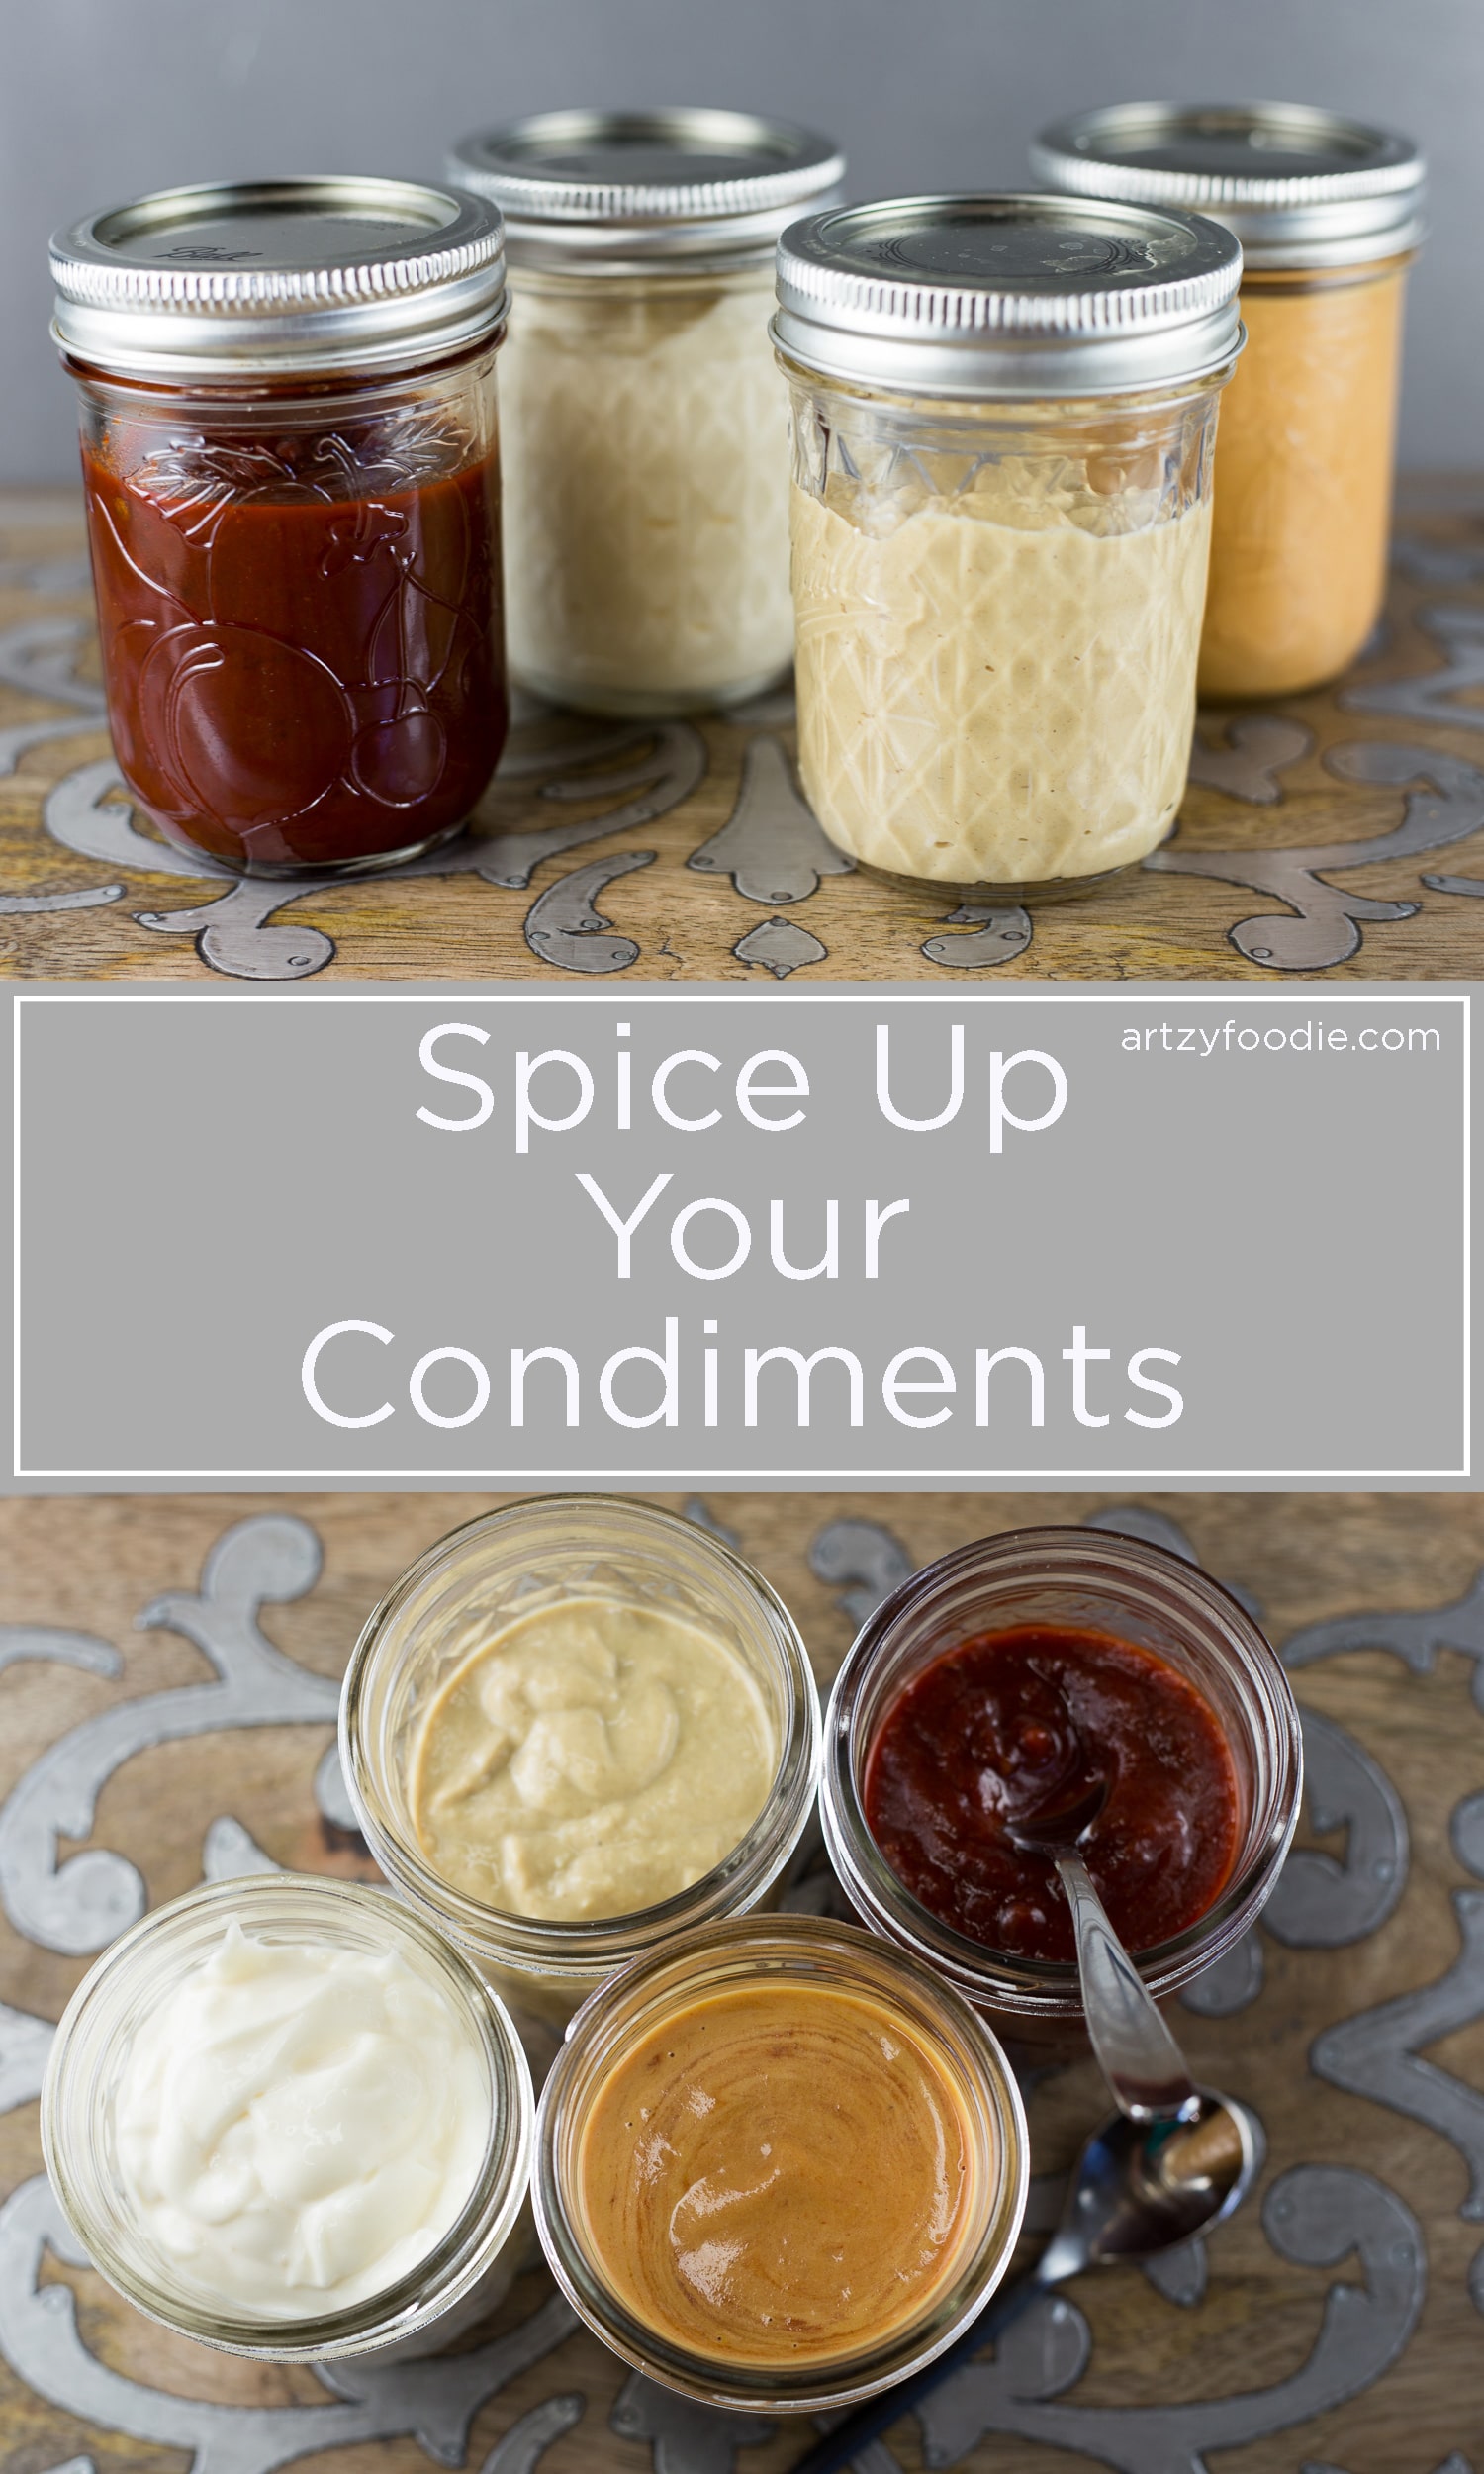 Kick up those boring condiments by adding some extra flavor!